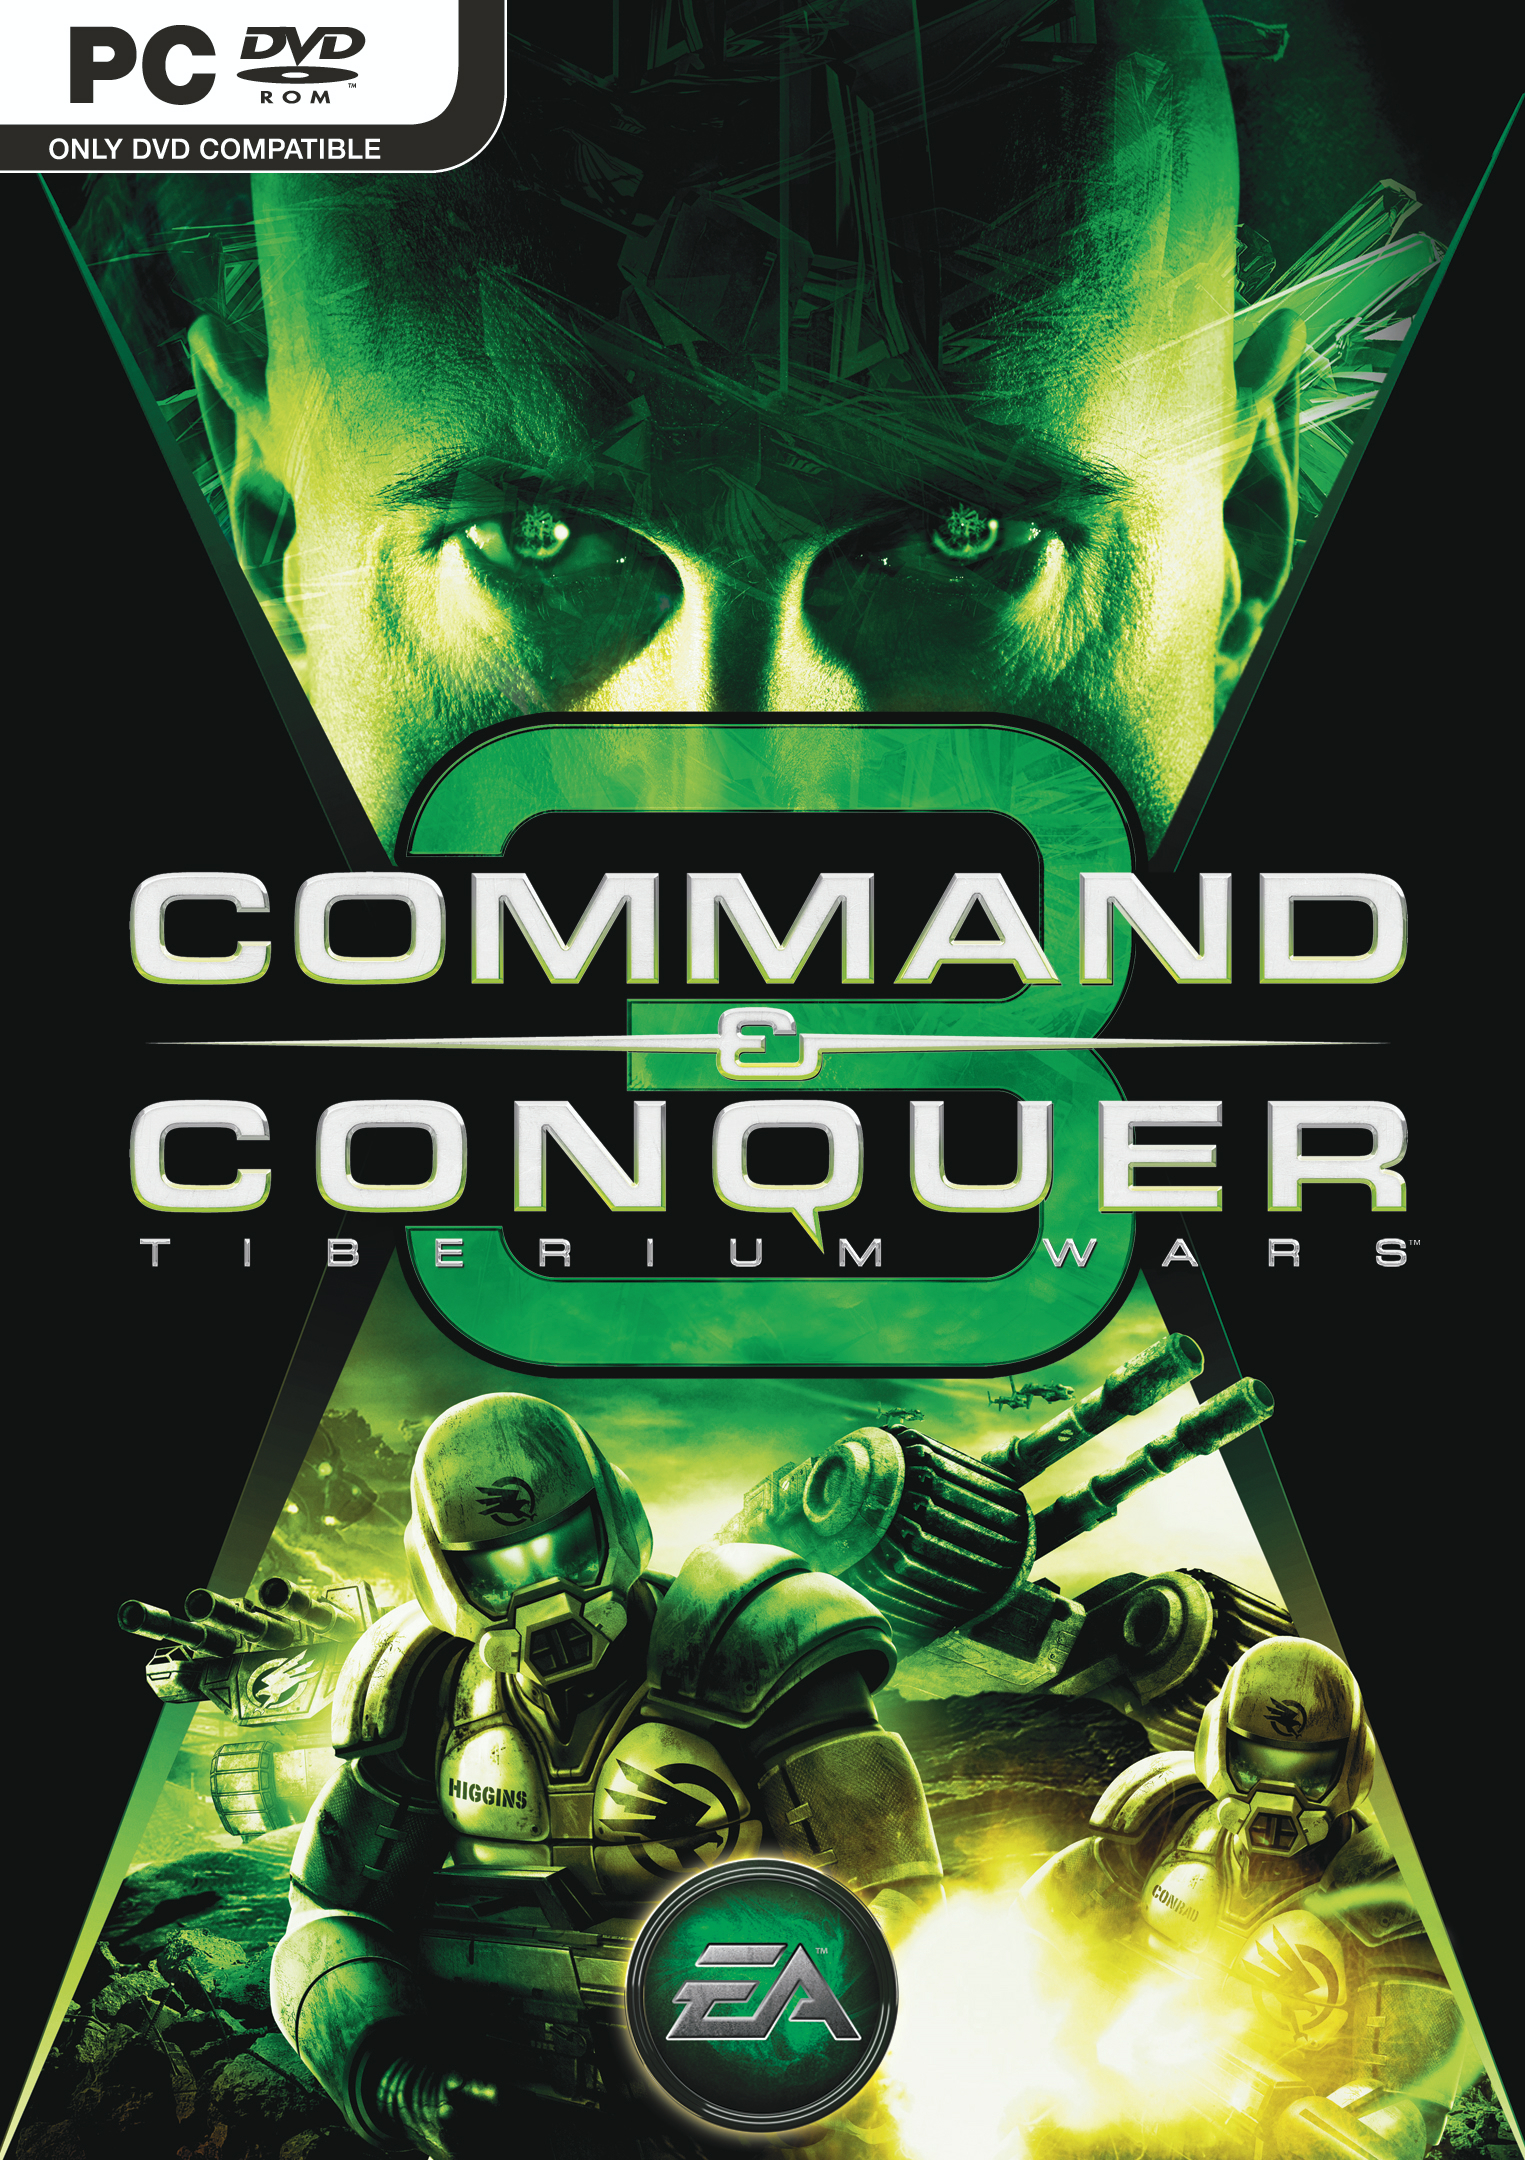 red alert command and conquer download windows xp